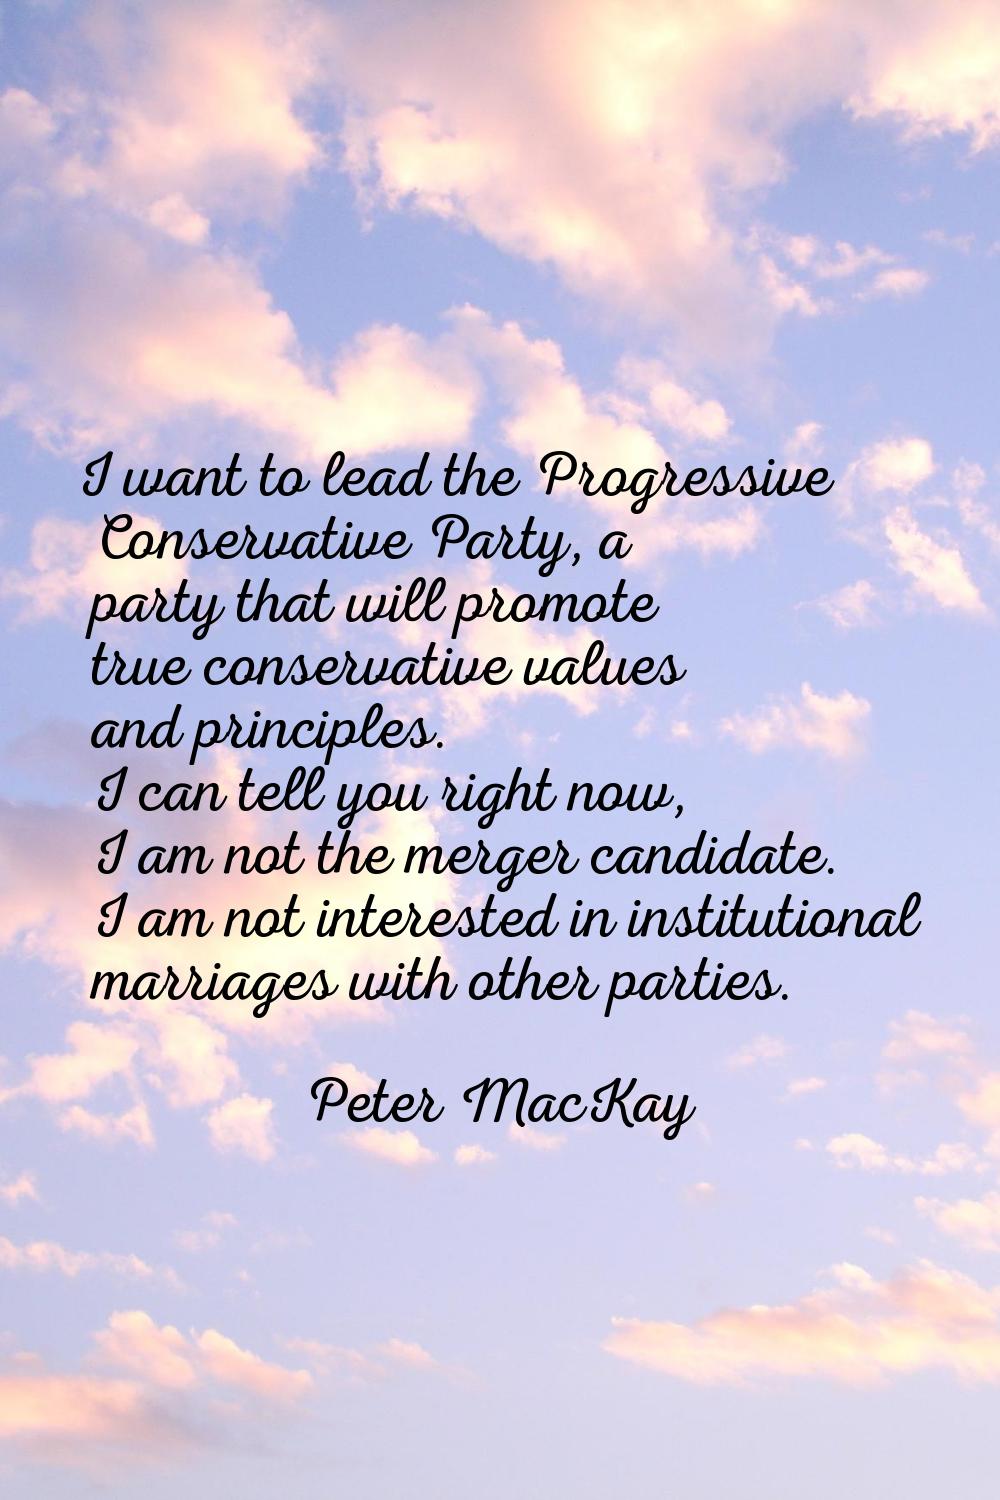 I want to lead the Progressive Conservative Party, a party that will promote true conservative valu